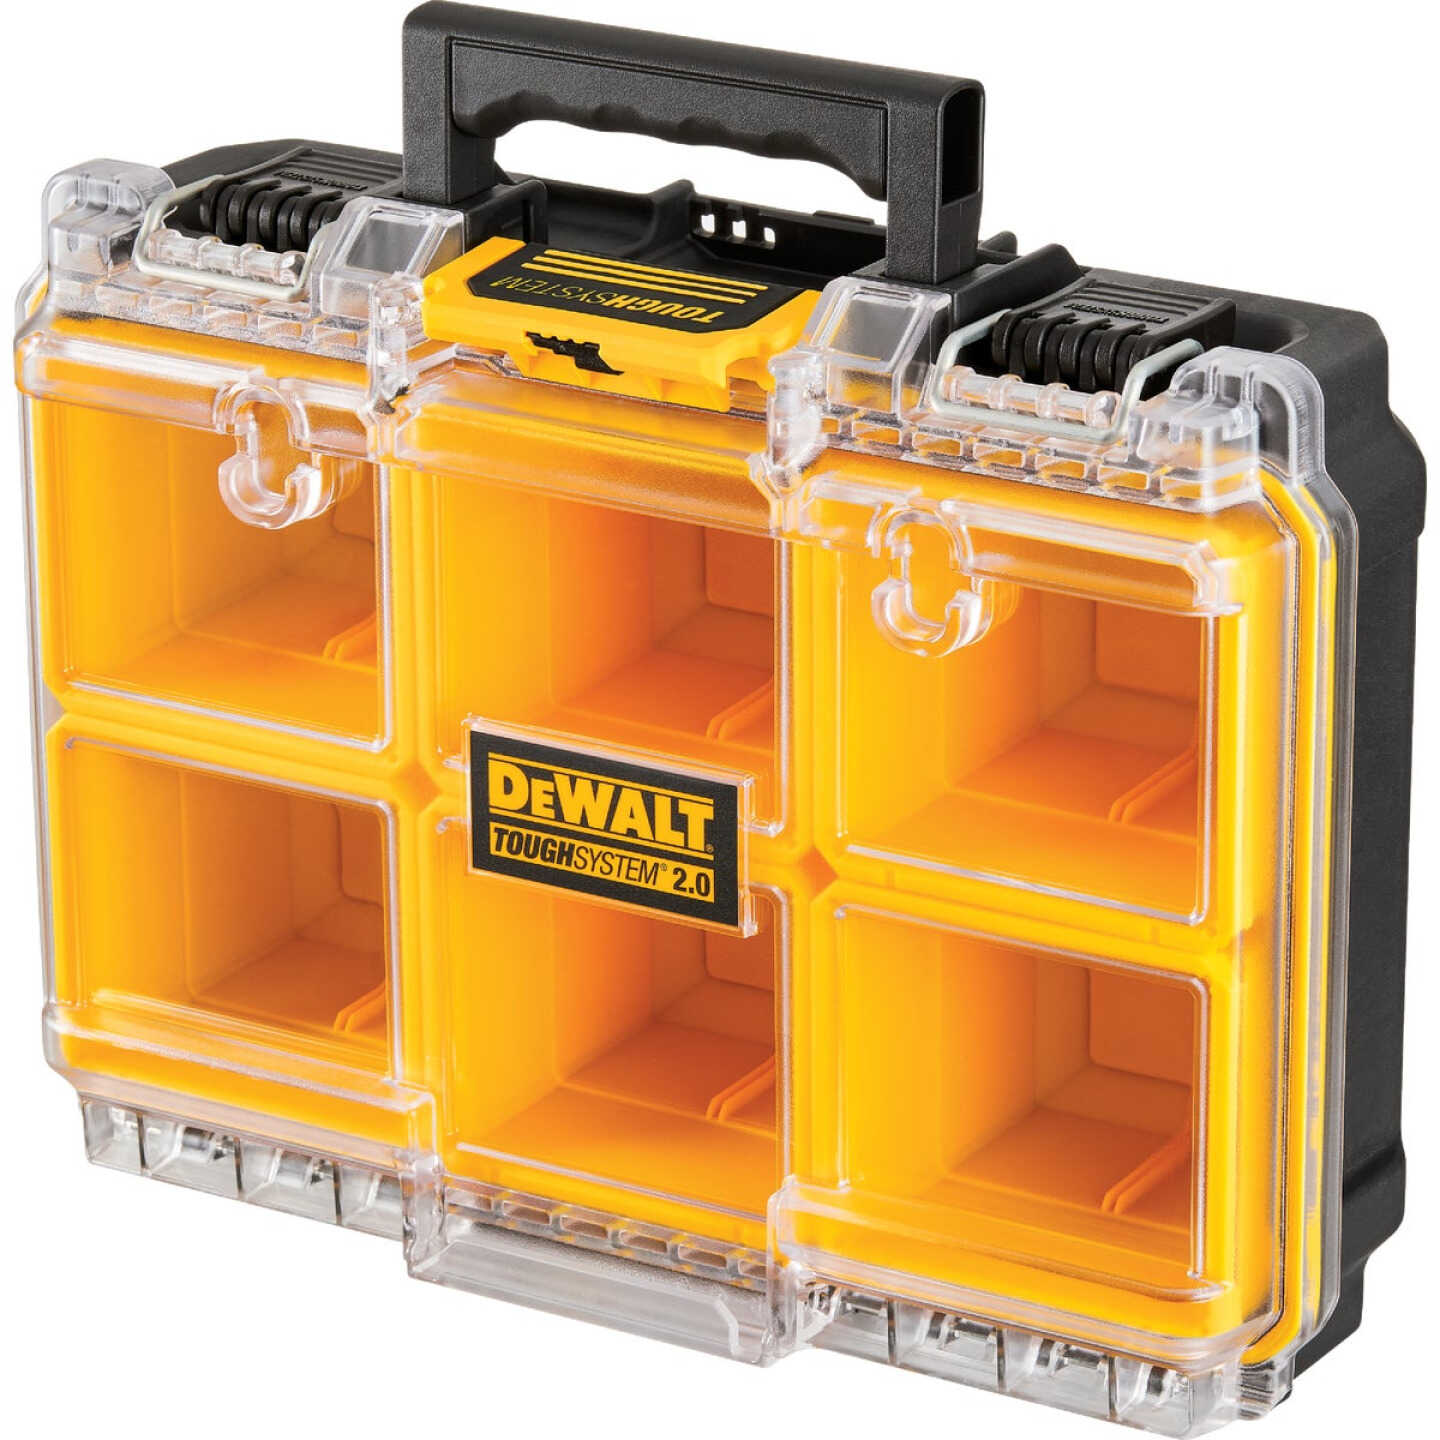 DEWALT Announces New ToughSystem 2.0 Tool Bags and Organizers - Compact  Equipment Magazine